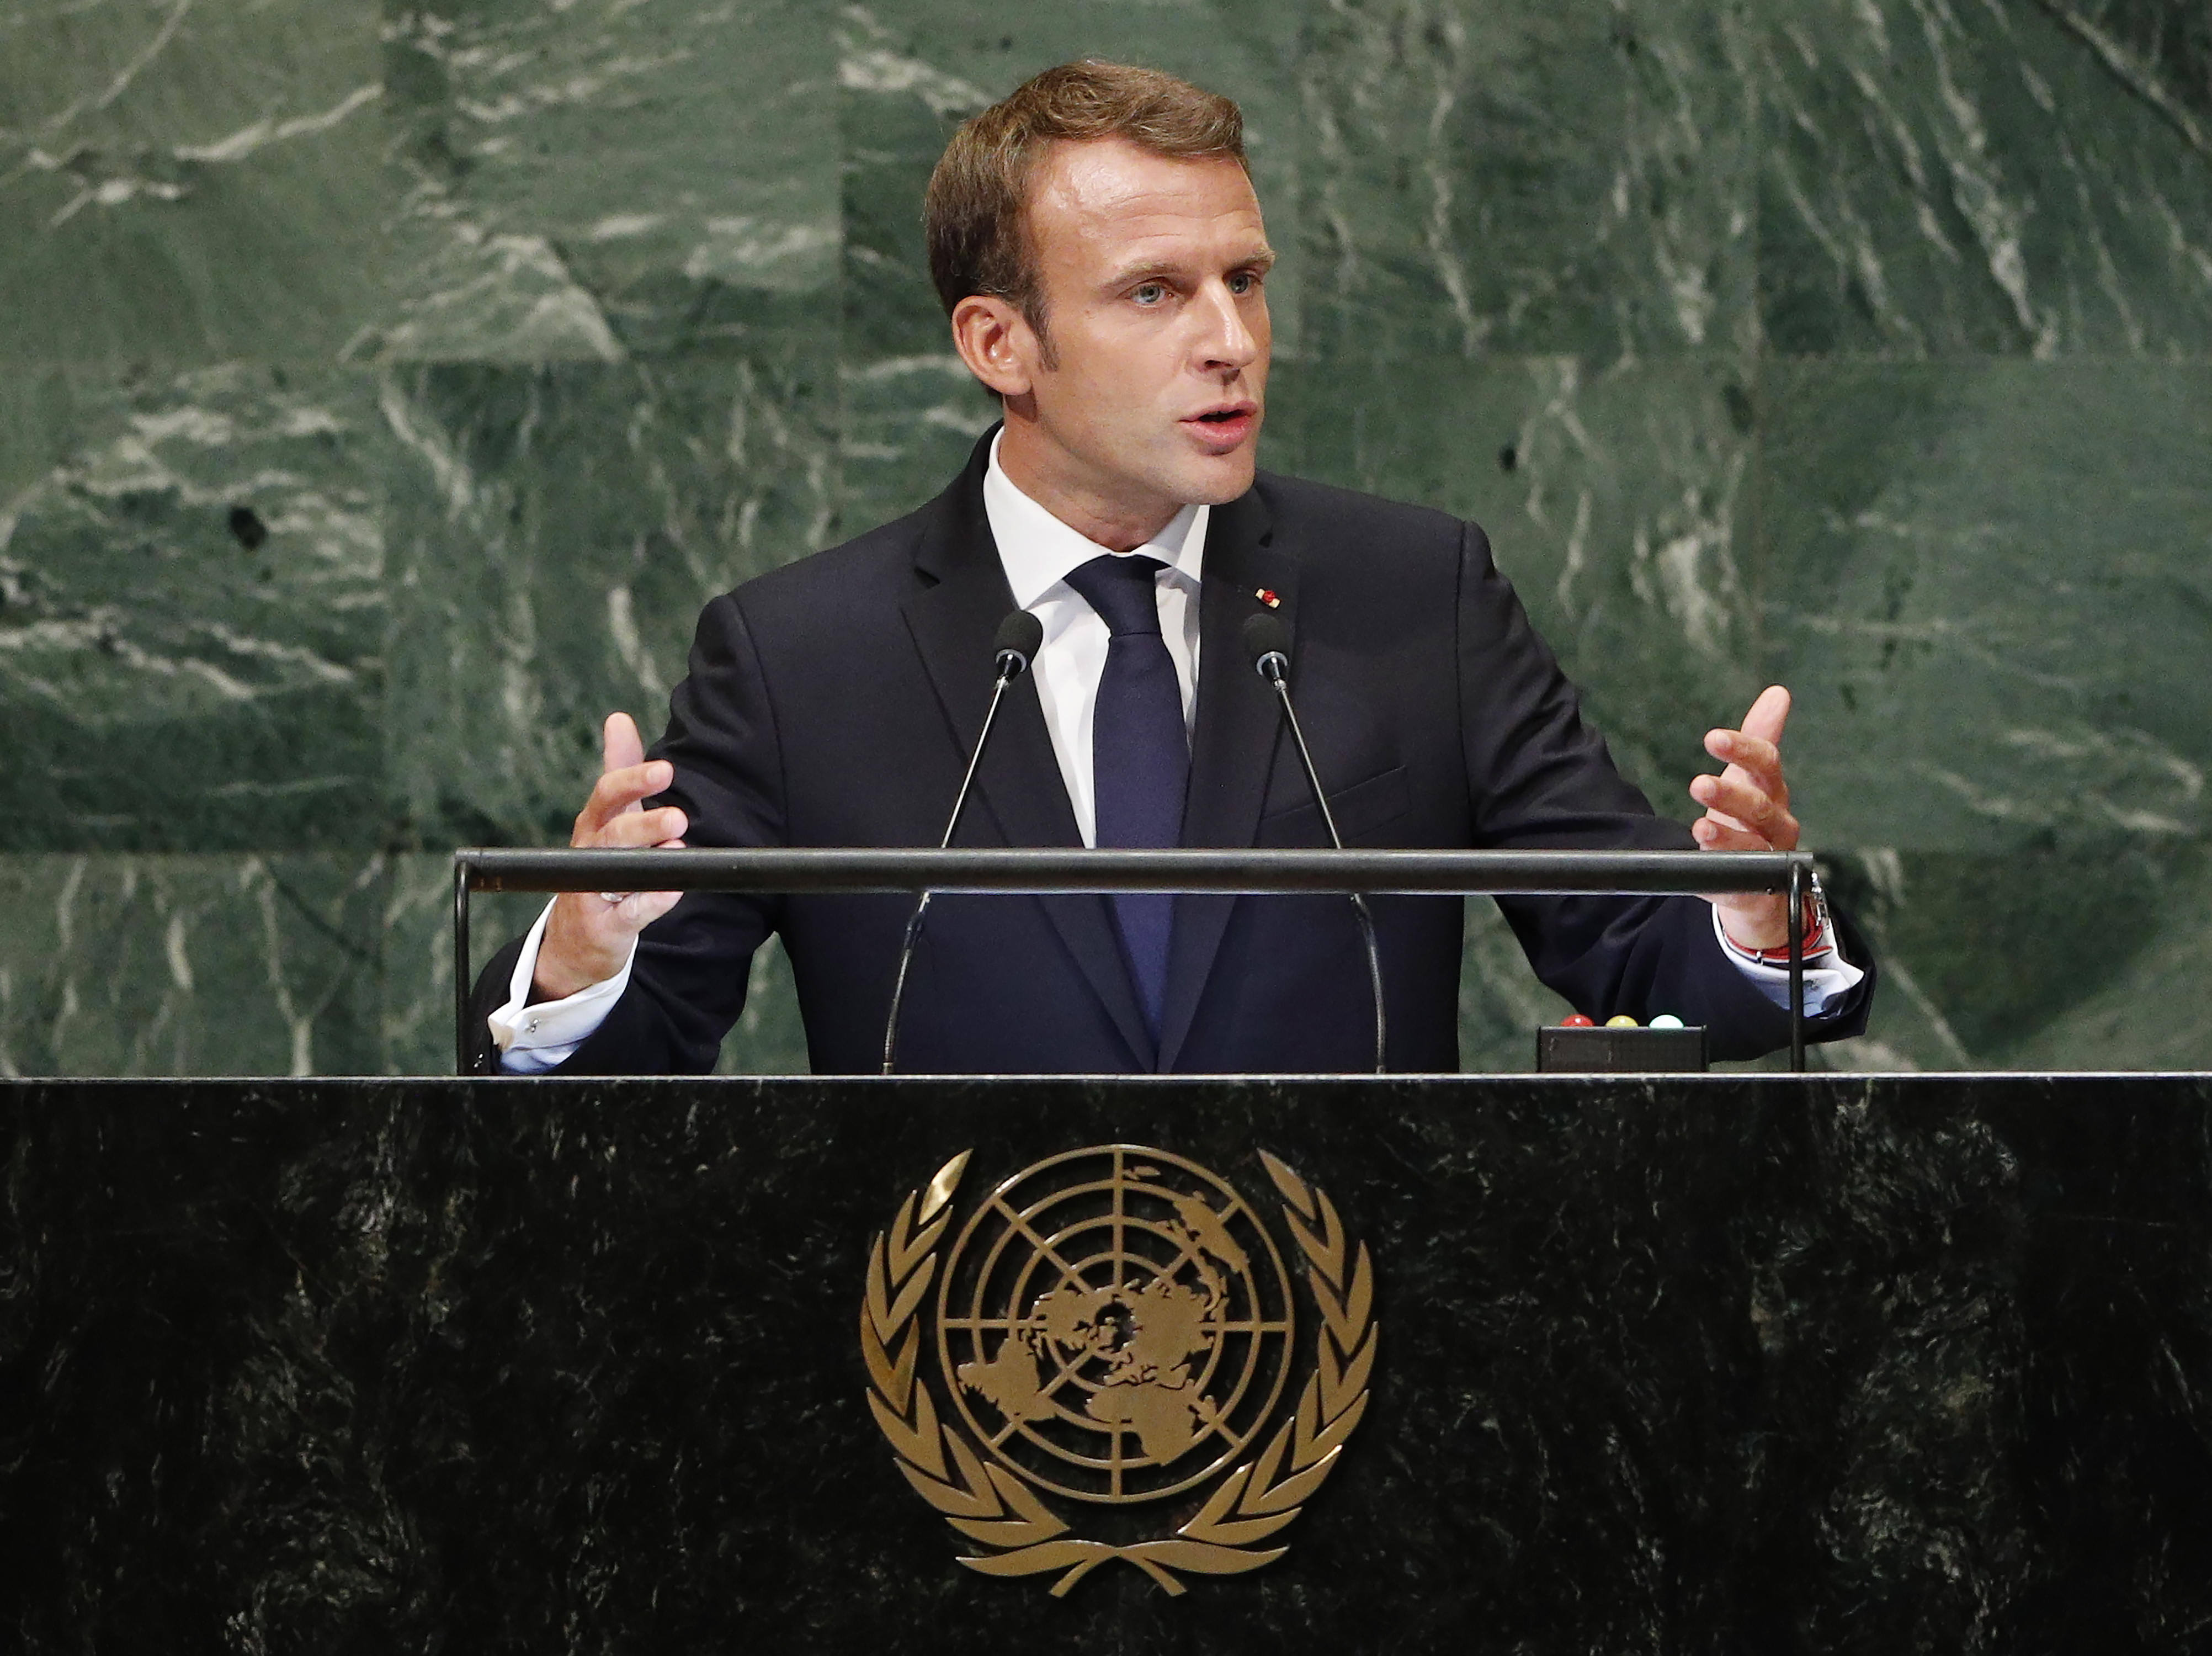 epa07046253 French President Emmanuel Macron addresses the General Debate of the General Assembly of the United Nations at United Nations Headquarters in New York, New York, USA, 25 September 2018. The General Debate of the 73rd session begins on 25 September 2018.  EPA/JUSTIN LANE